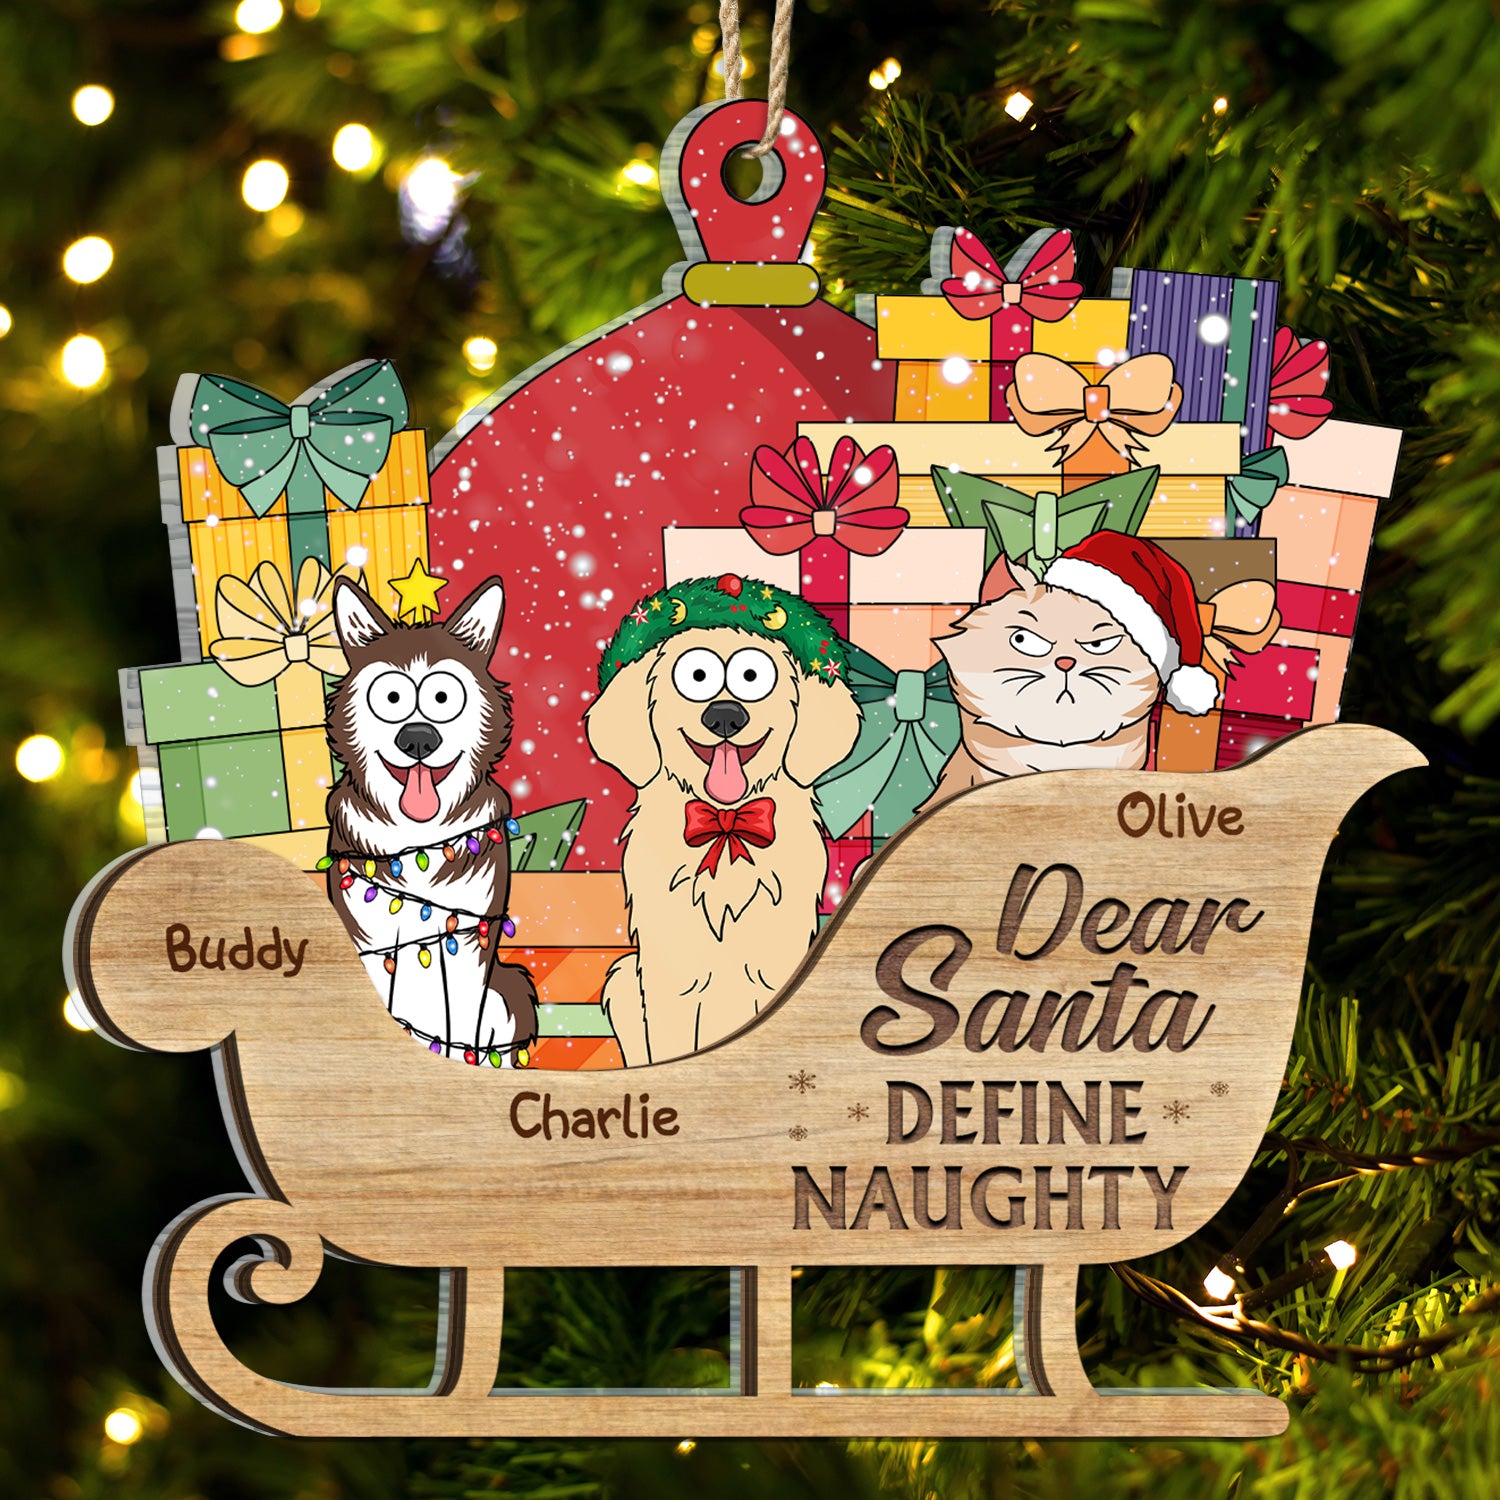 Dear Santa Define Naughty Dogs, Cats - Christmas, Birthday, Funny Gift For Dog Lovers, Cat Lovers, Pet Owners - Personalized 2-Layered Mix Ornament